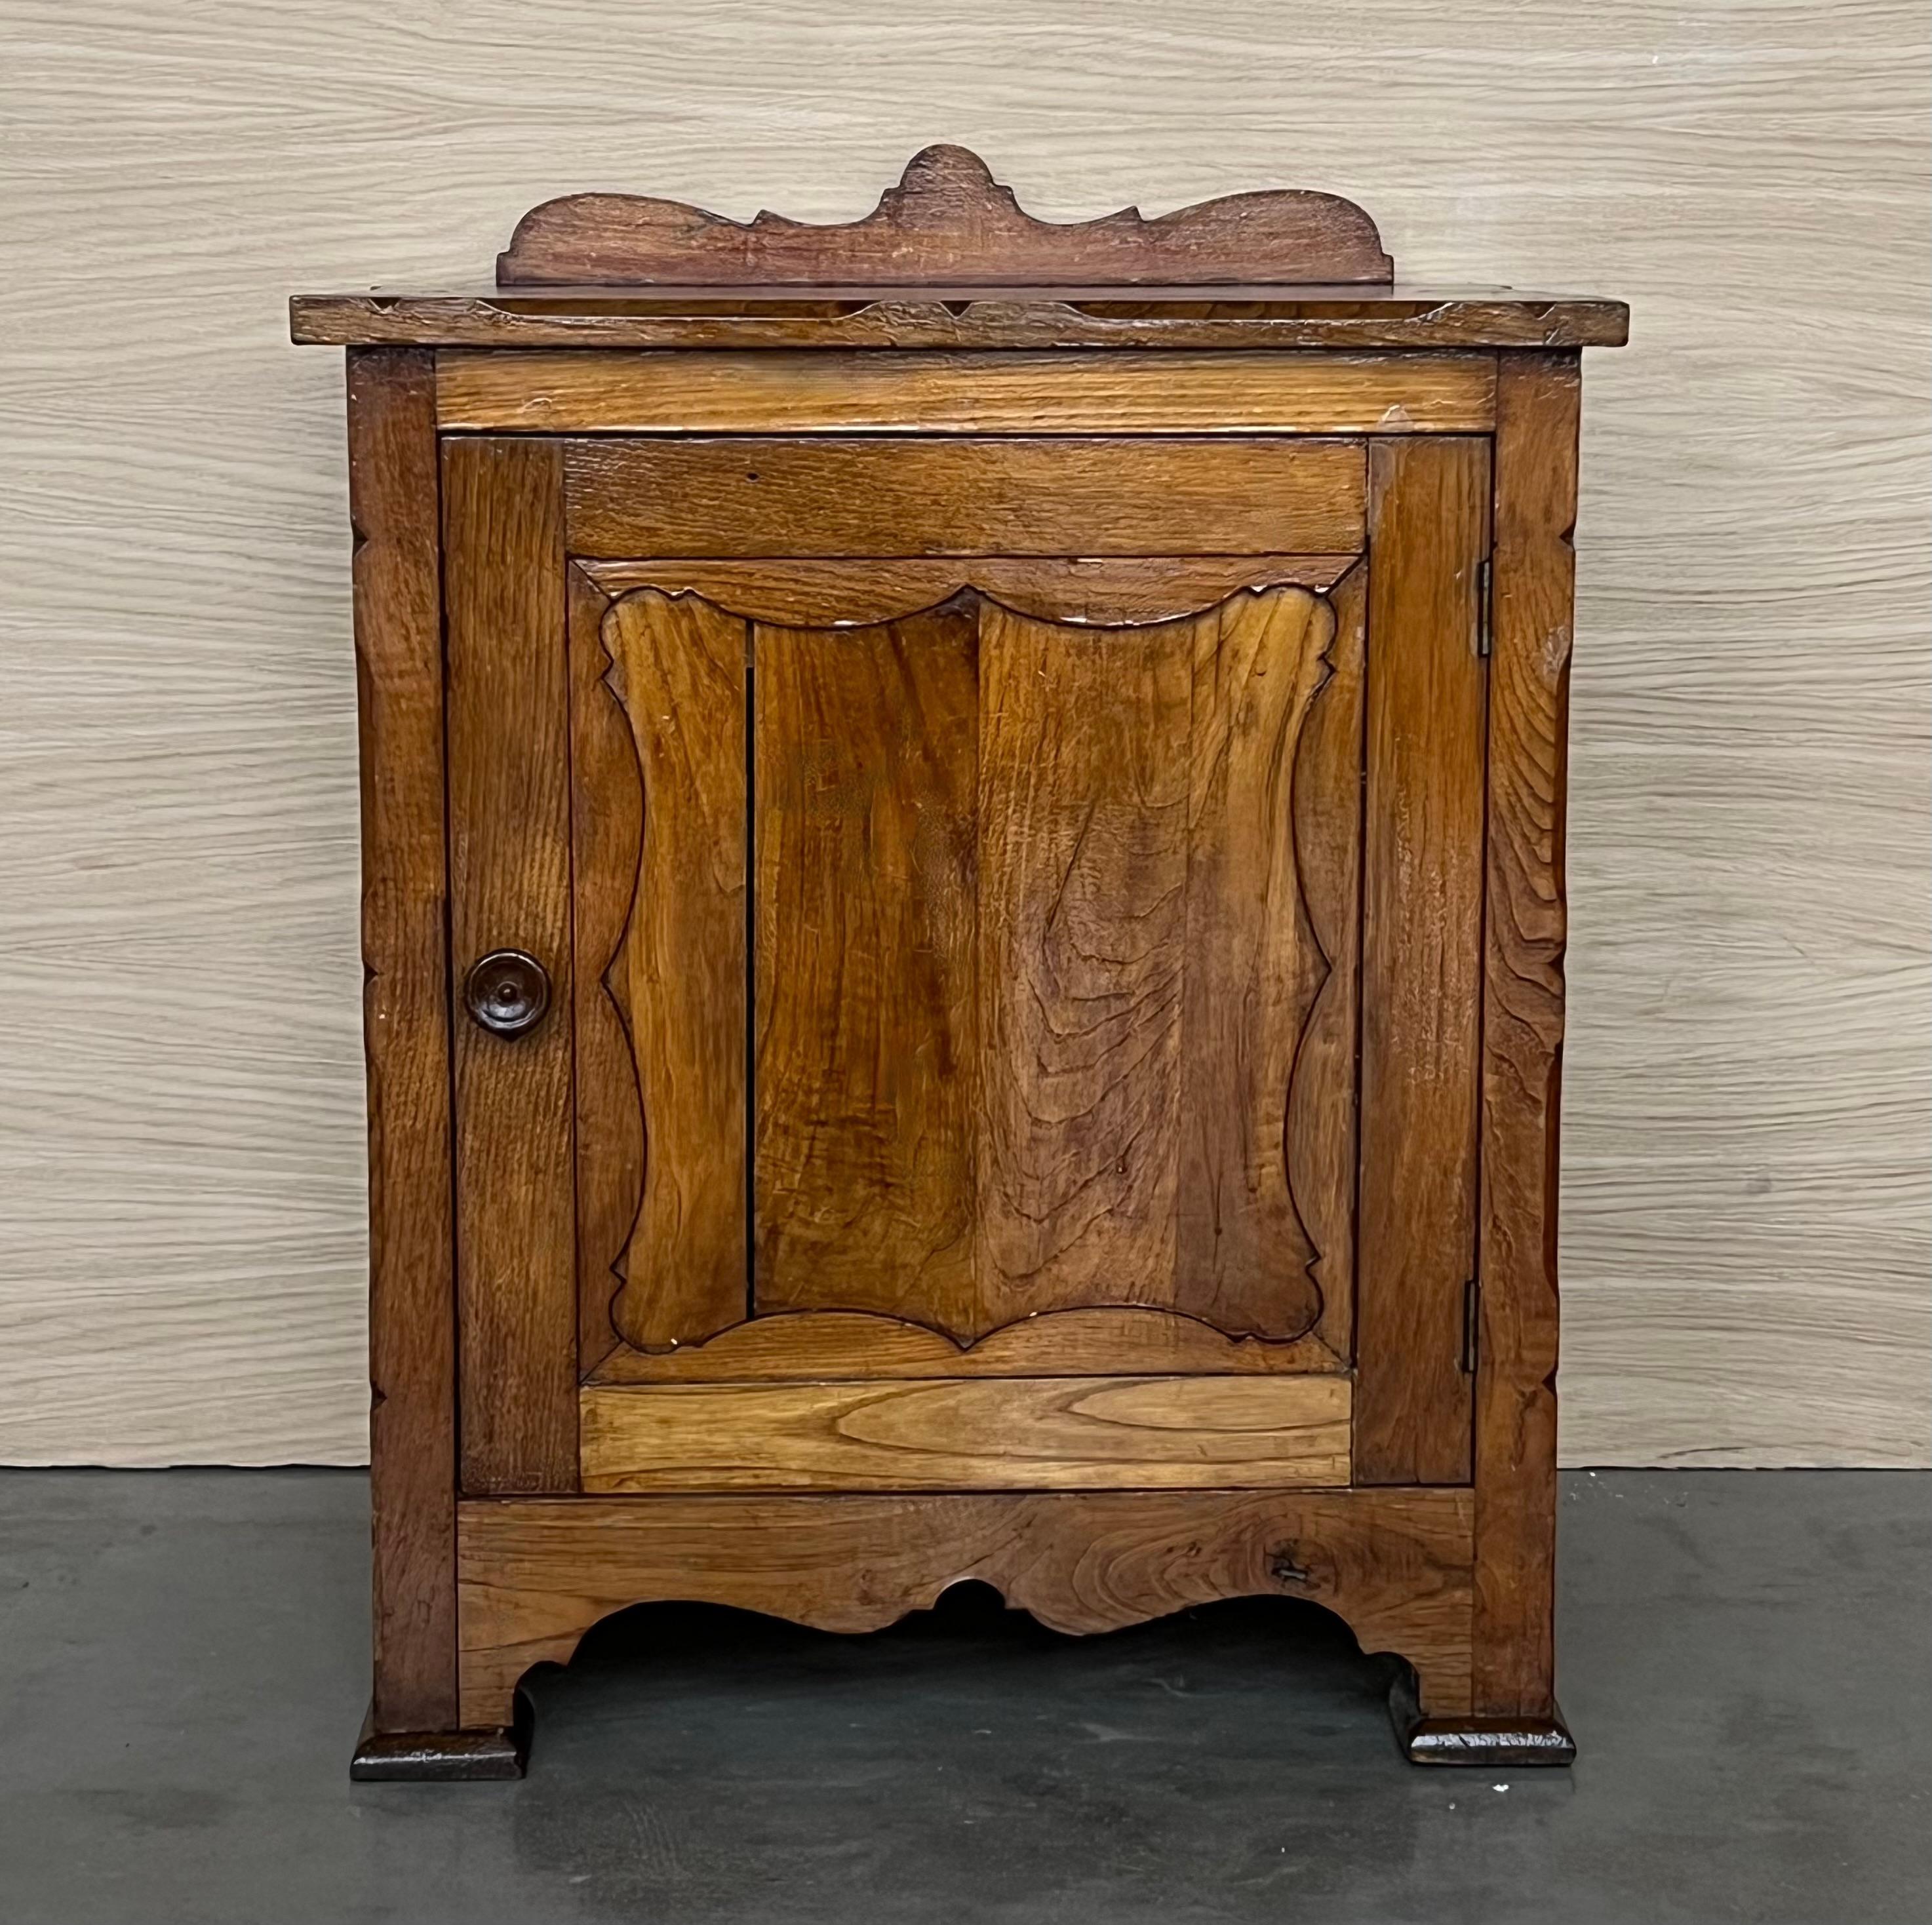 Early 20th century Spanish country nightstands. Made of mobila with a deep color and original patination. A single hide drawer and cabinet when you open the door. Around 1920.
The door and drawer handles are made of wood.